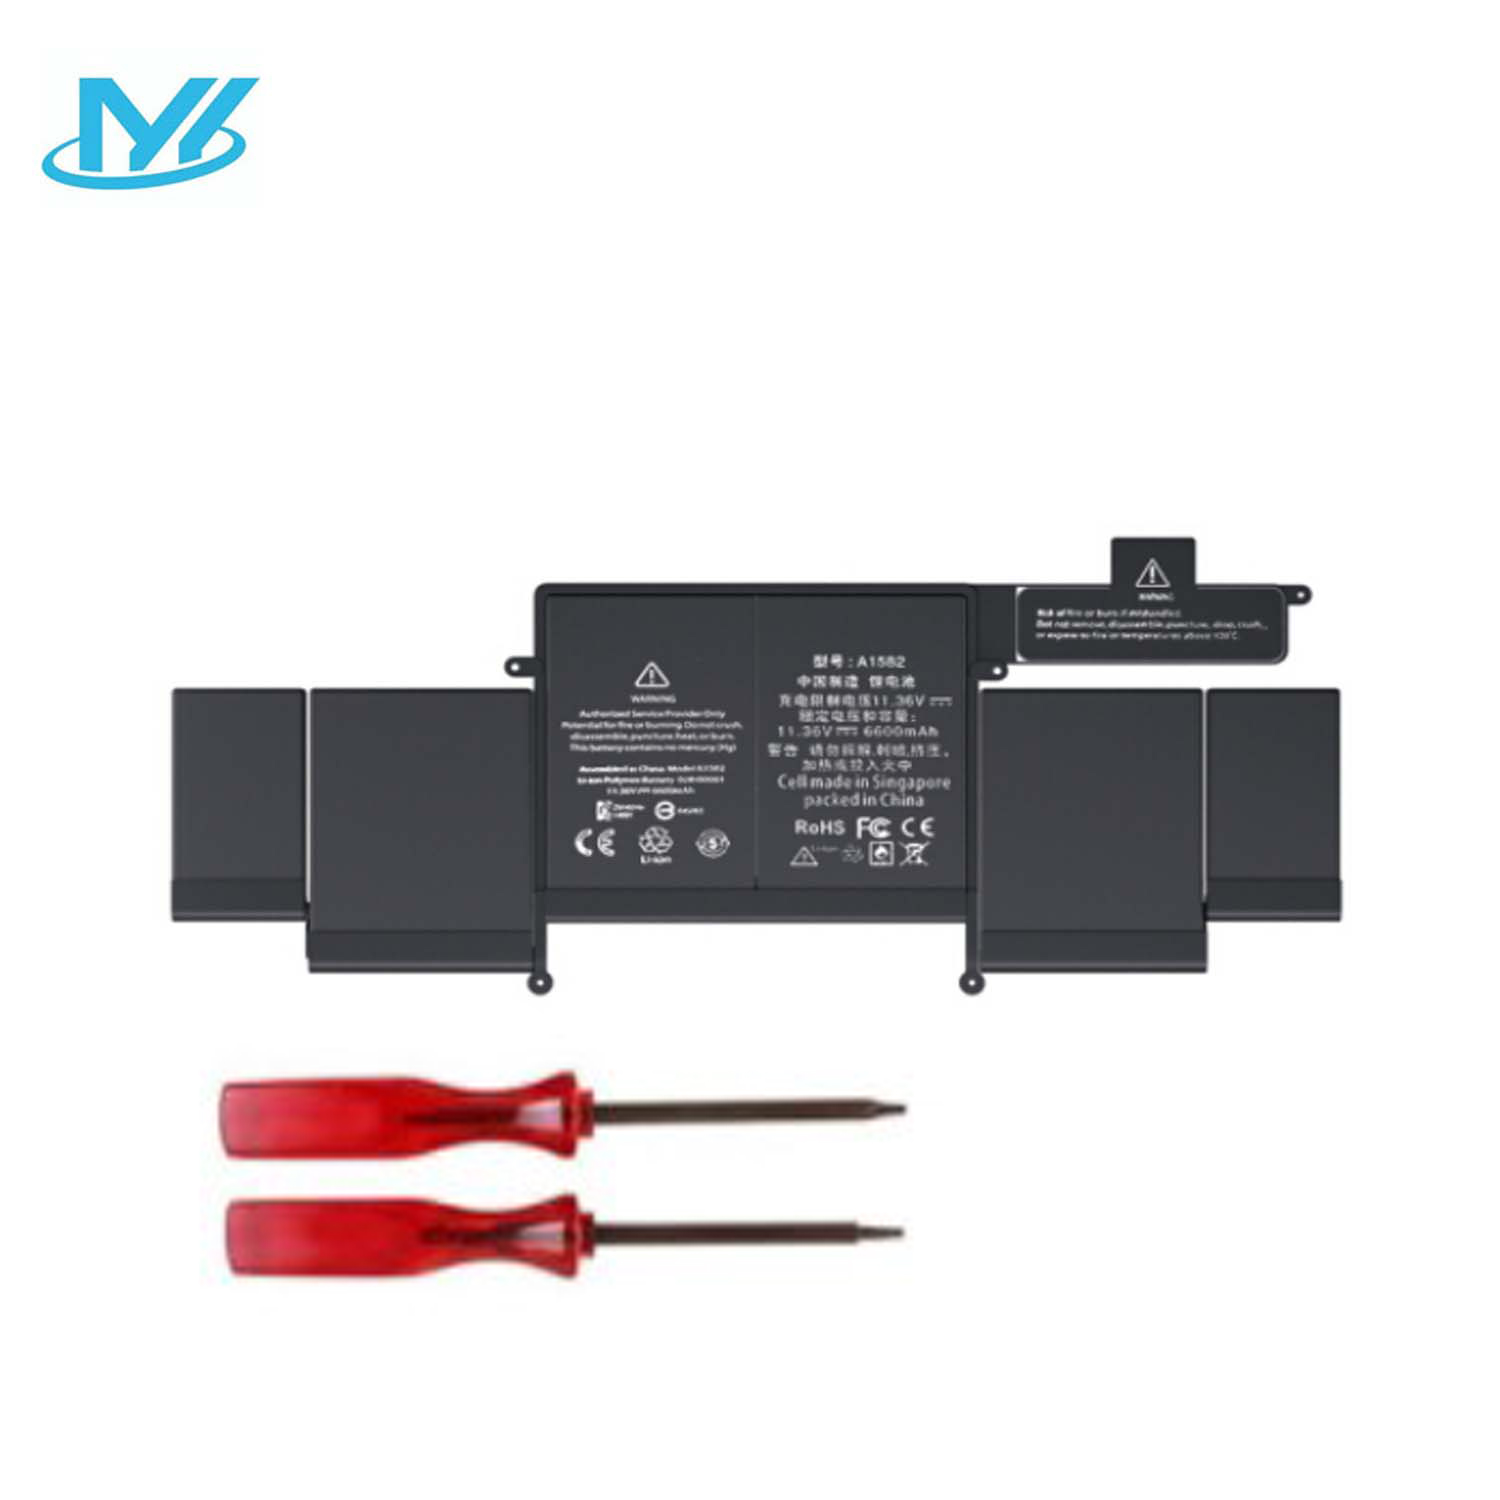 Best Seller OEM Manufacturer laptop battery lithium ion batteries A1502 A1582 A1493 for APPLE MacBook retina 13" Retina A1502 2015 year